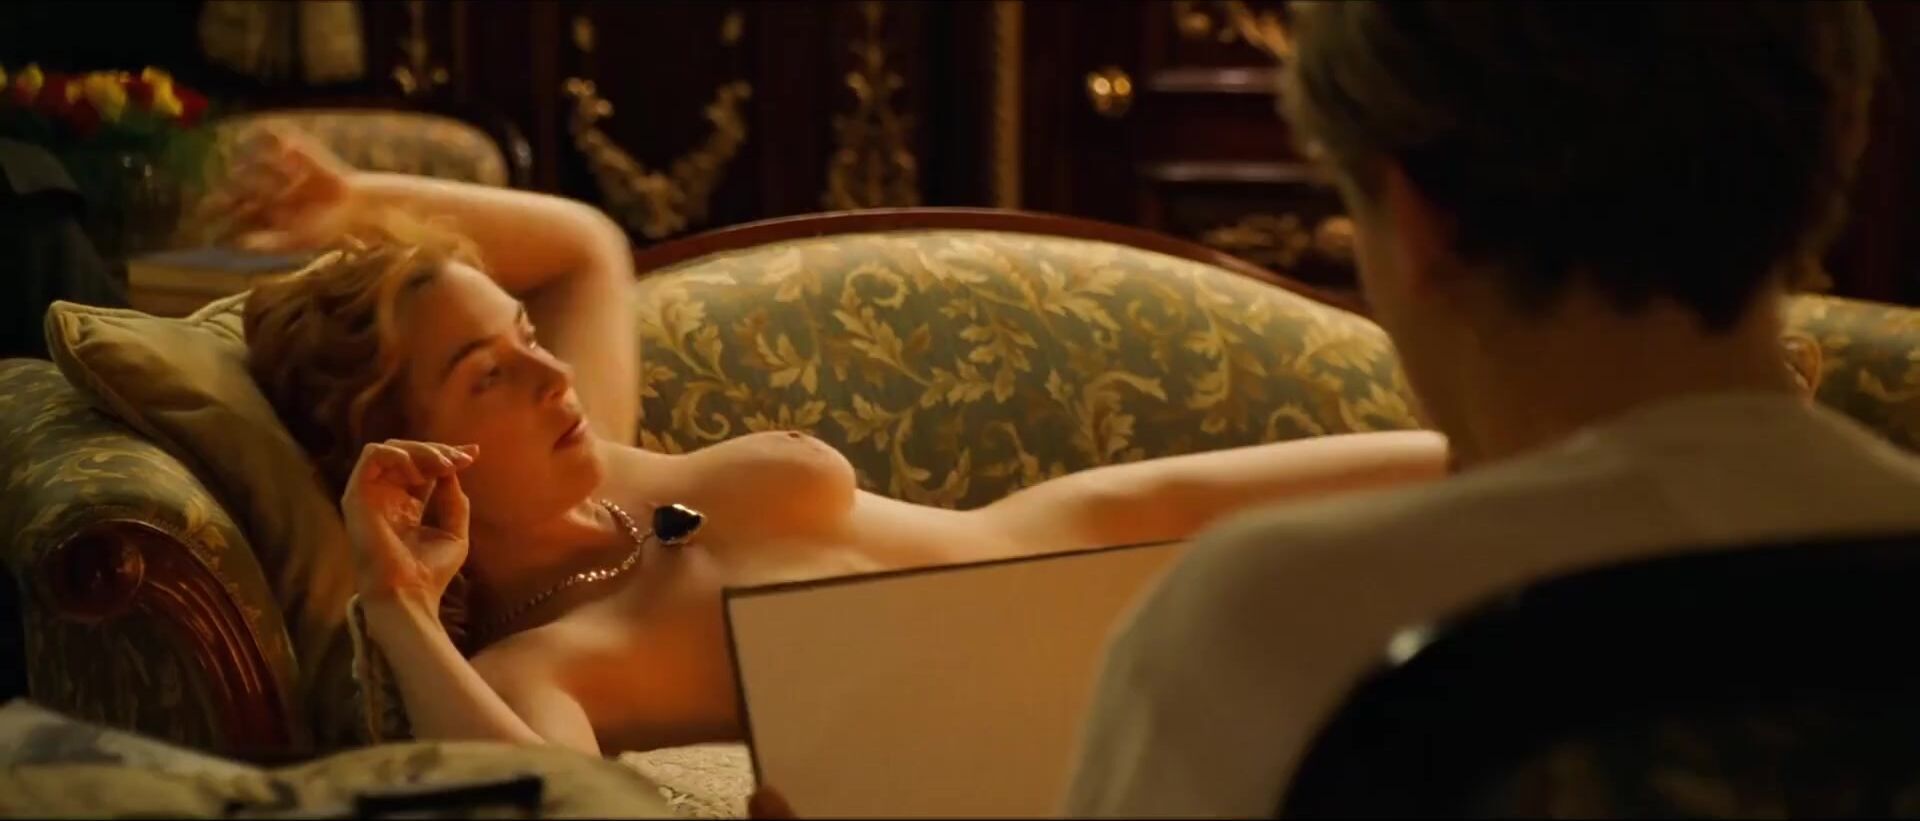 Teenage Sex Leonardo DiCaprio loves chick's body and draws her before fucking in Titanic (1997) Daring